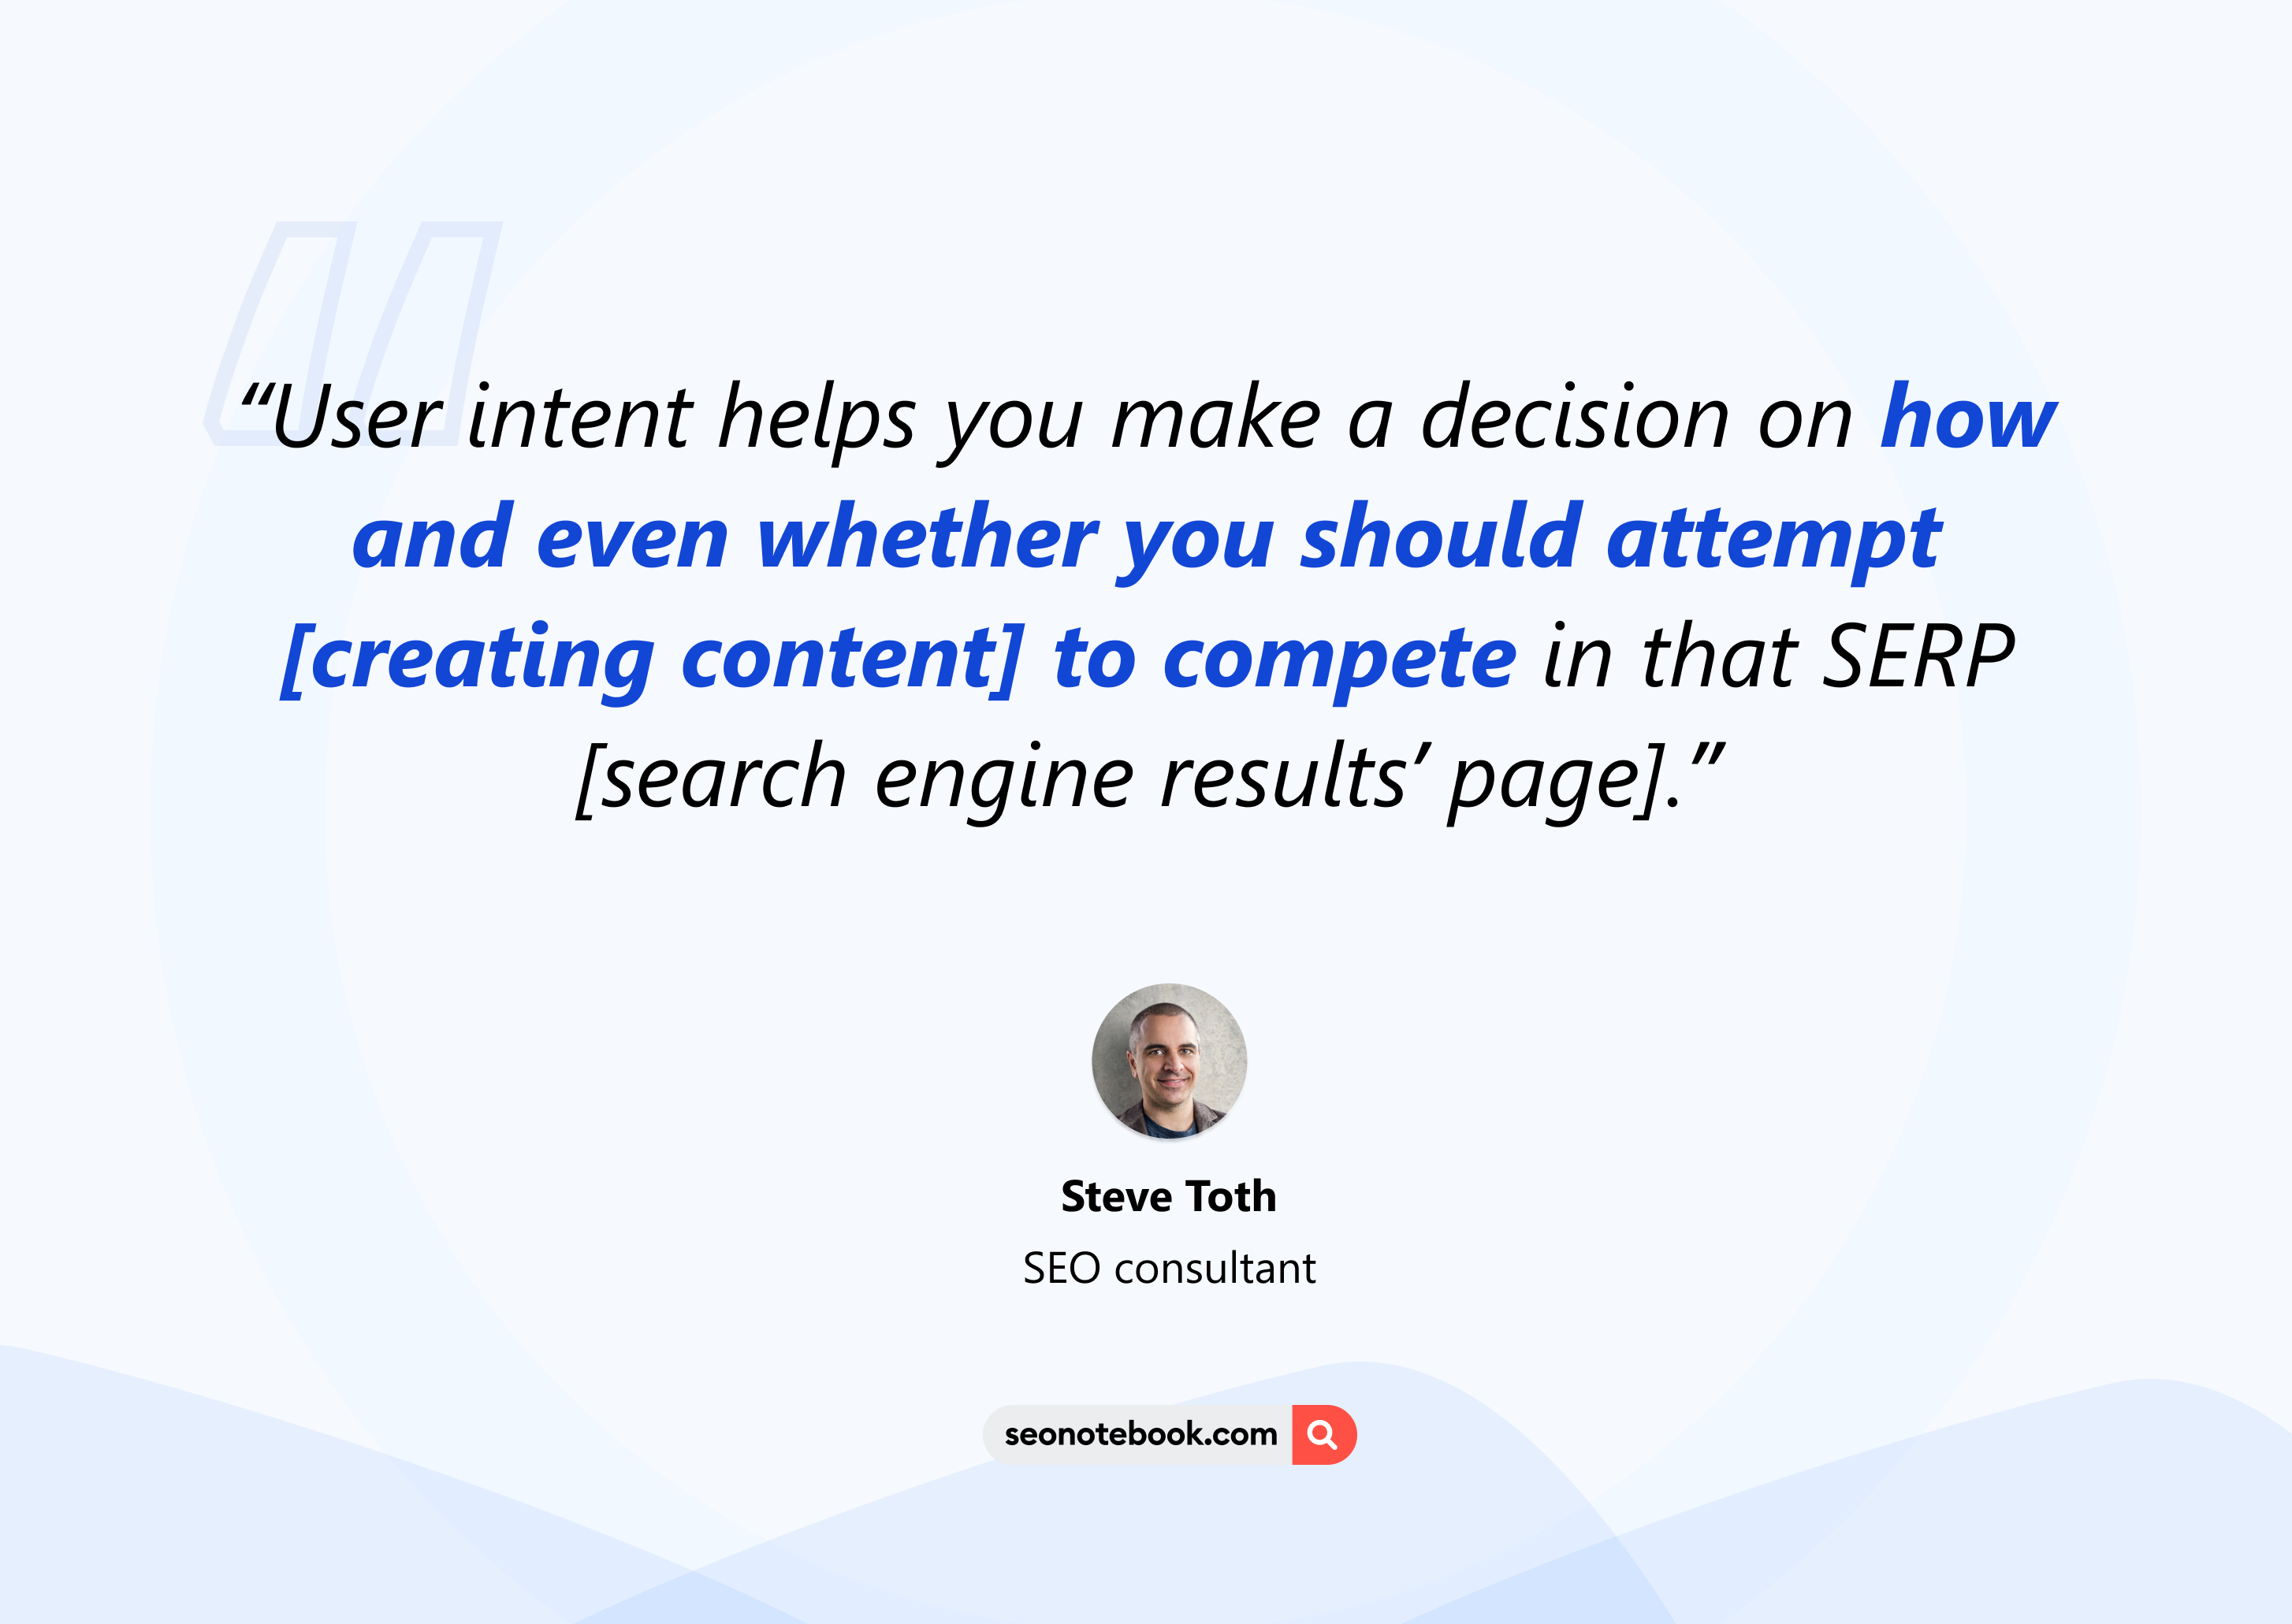 Steve Toth's quote about User intent